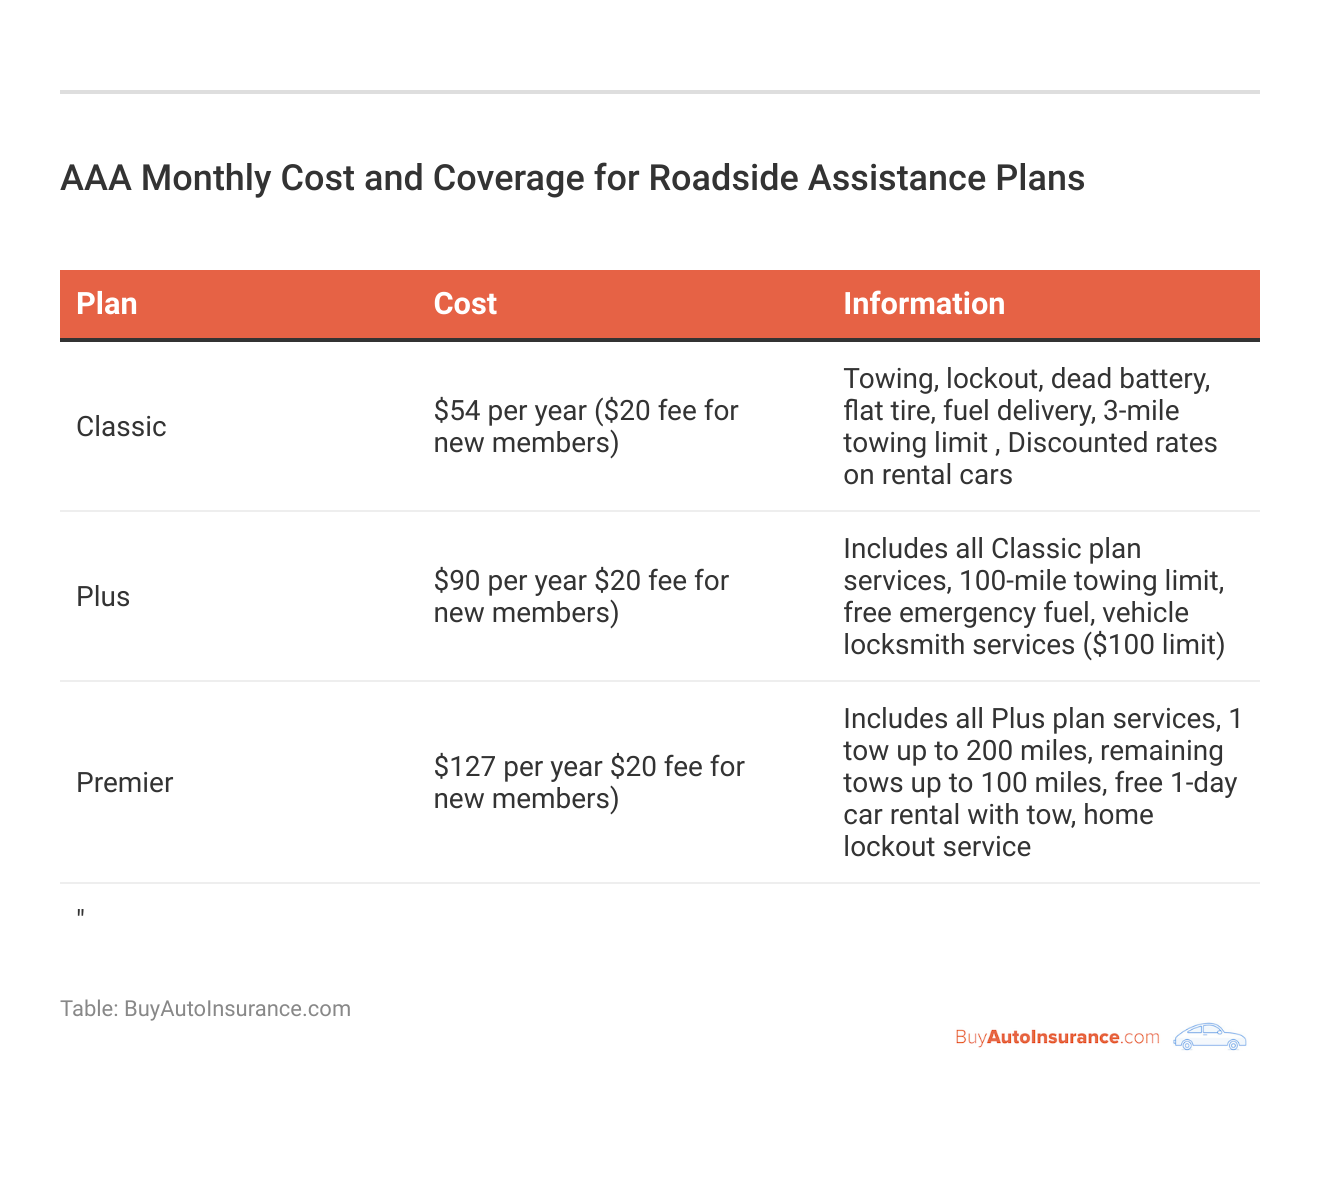 <h3>AAA Monthly Cost and Coverage for Roadside Assistance Plans</h3>